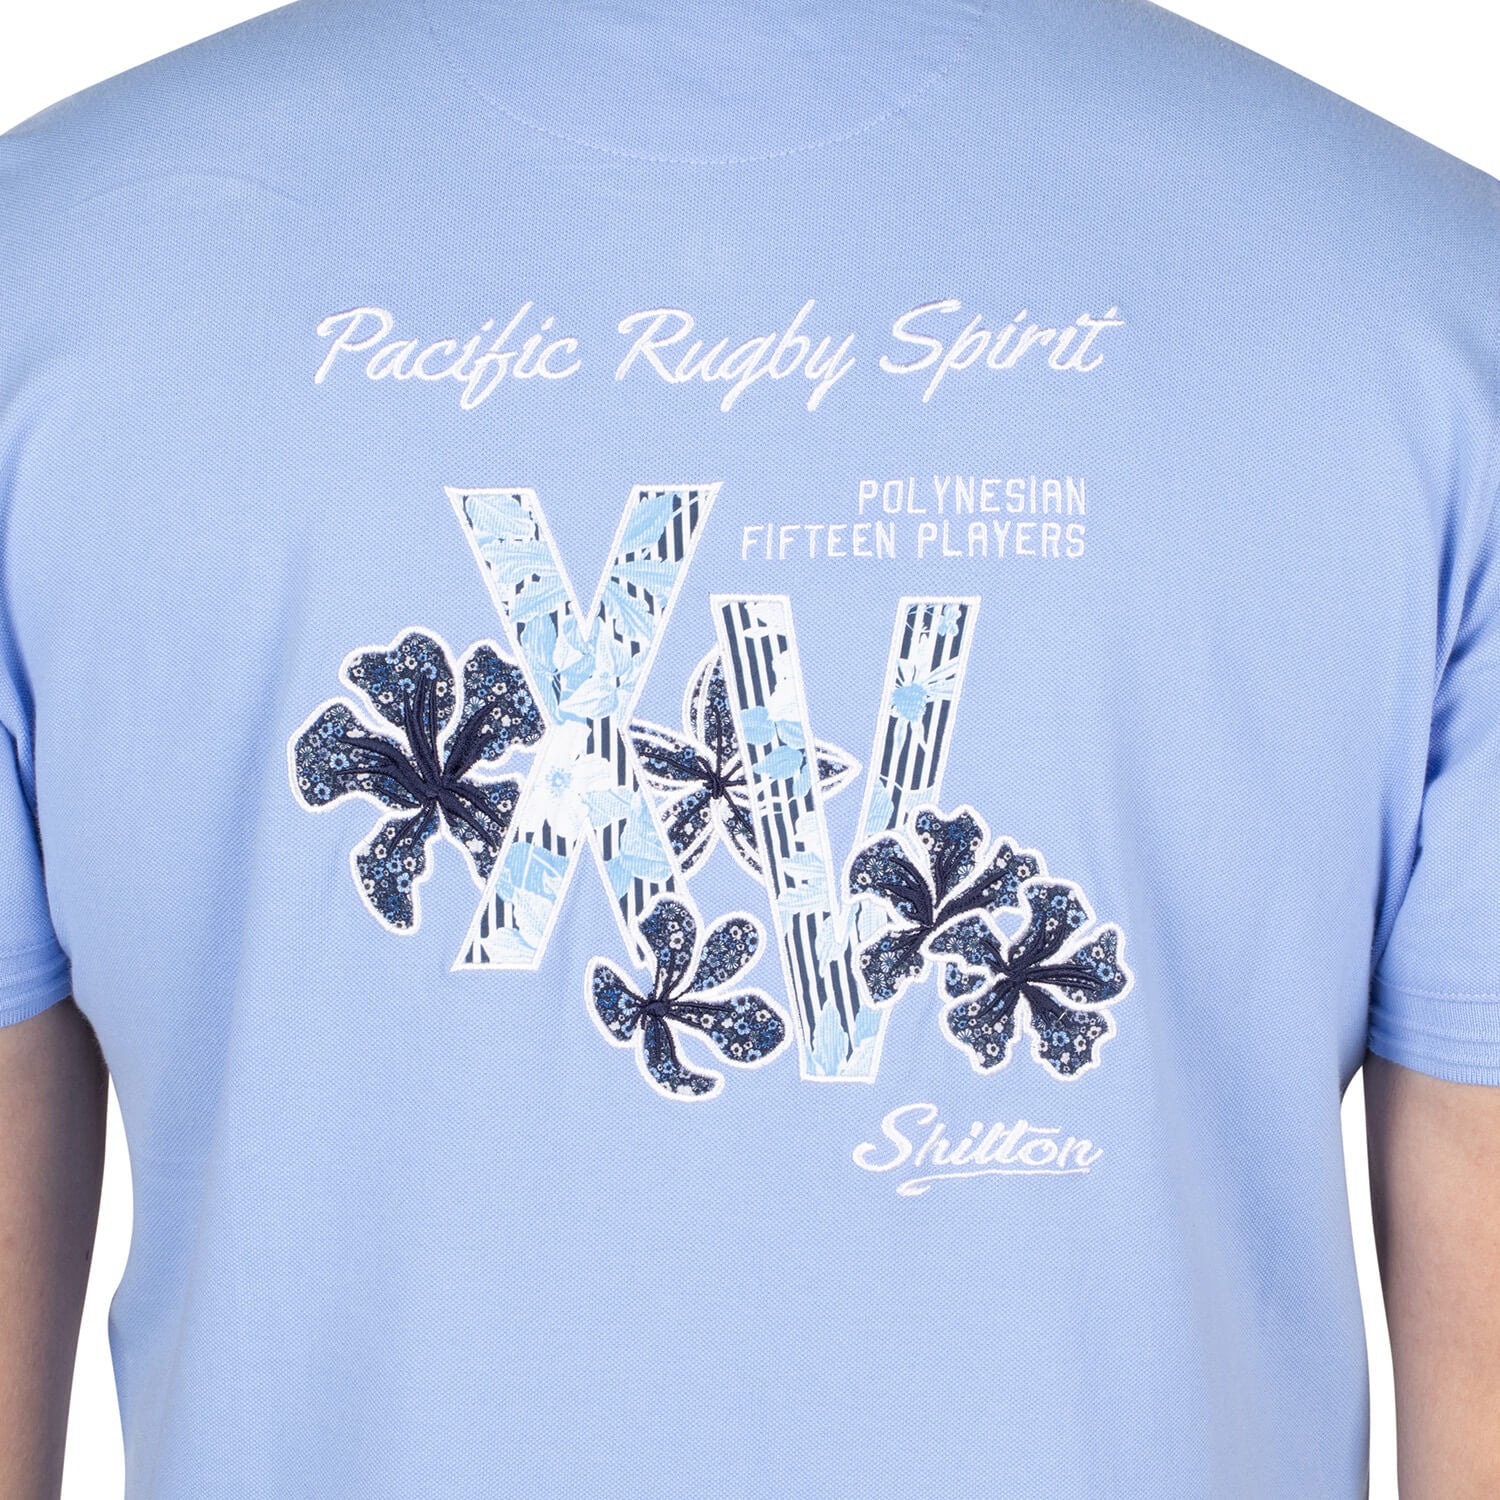 Polo rugby pacific